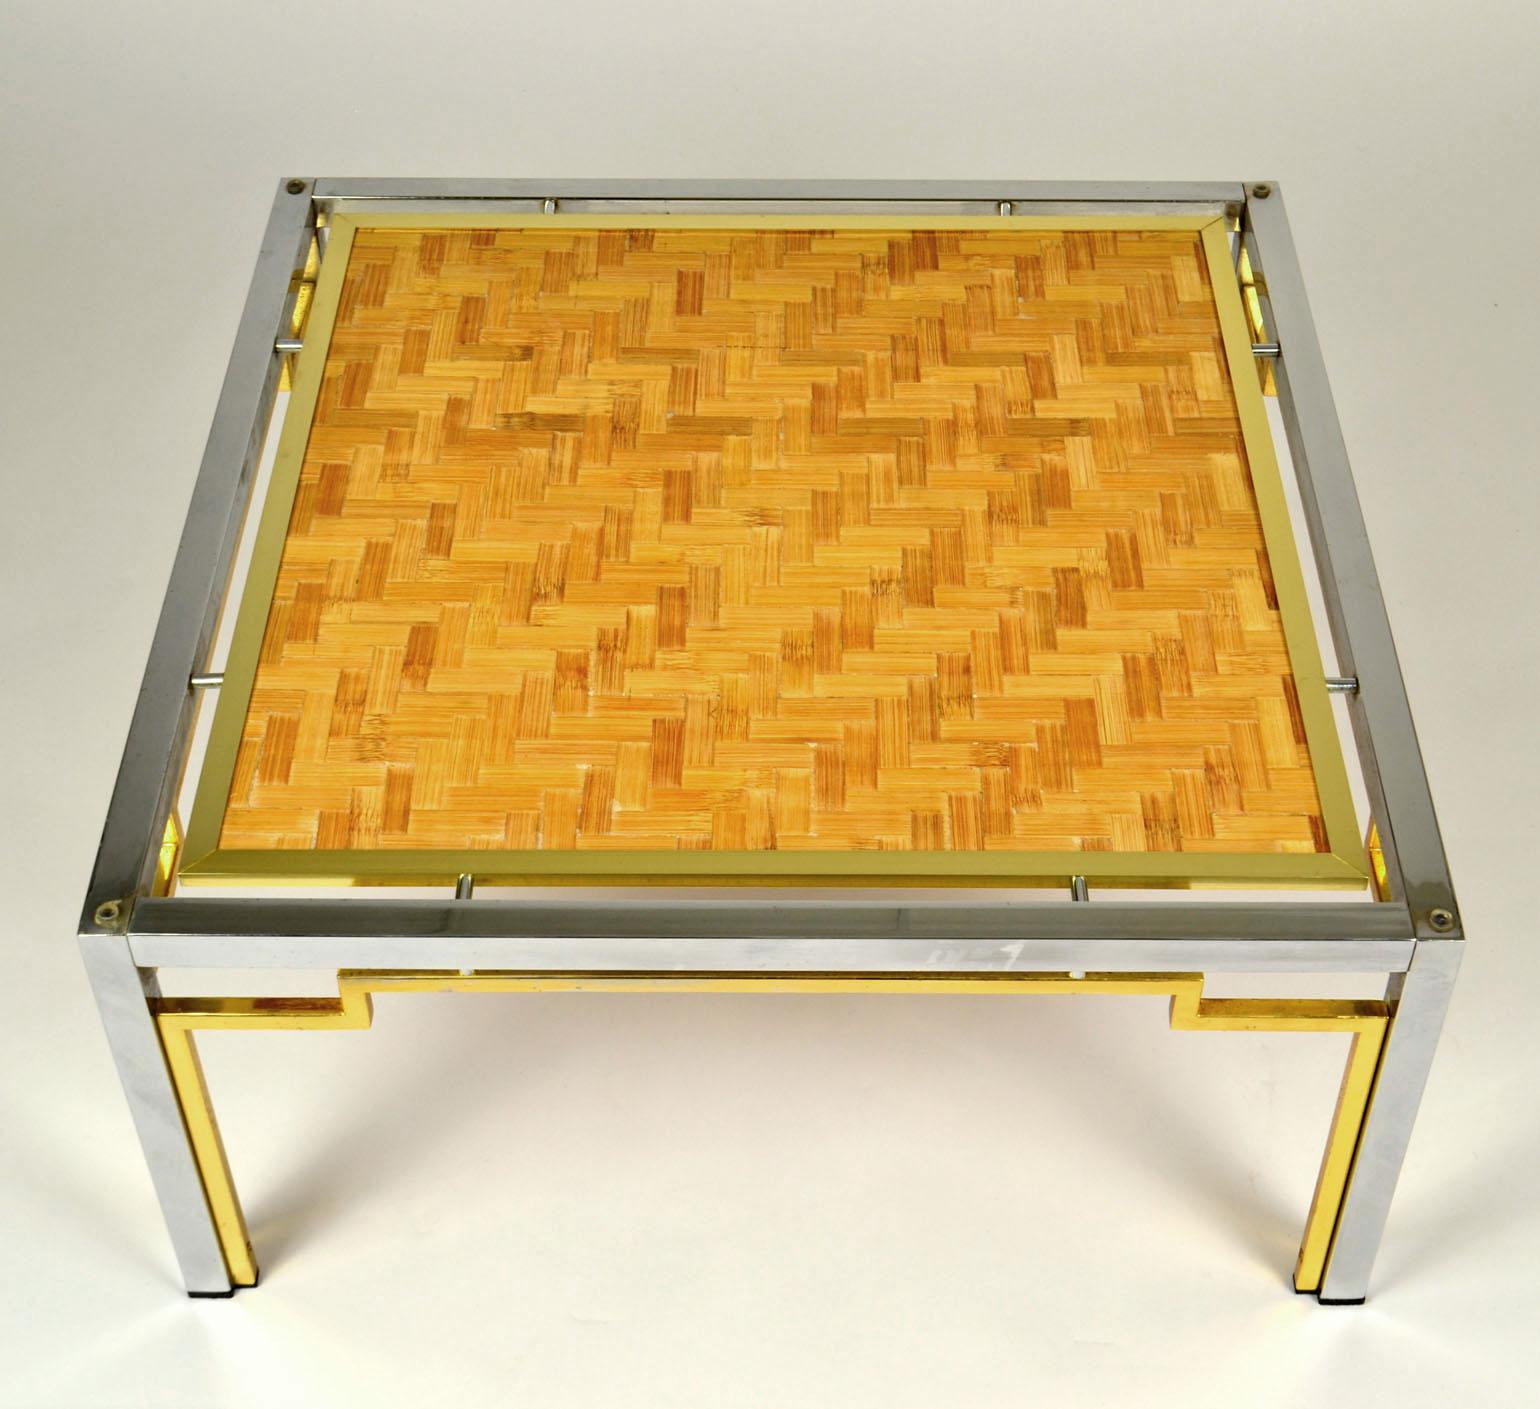 Pair of Square coffee tables, Italiancirca 1970. The top is executed in intricate bamboo marquettry in parquet design with glass on top, framed in a polished chrome and brass base with gilded chrome details and a glass top. They are high-quality